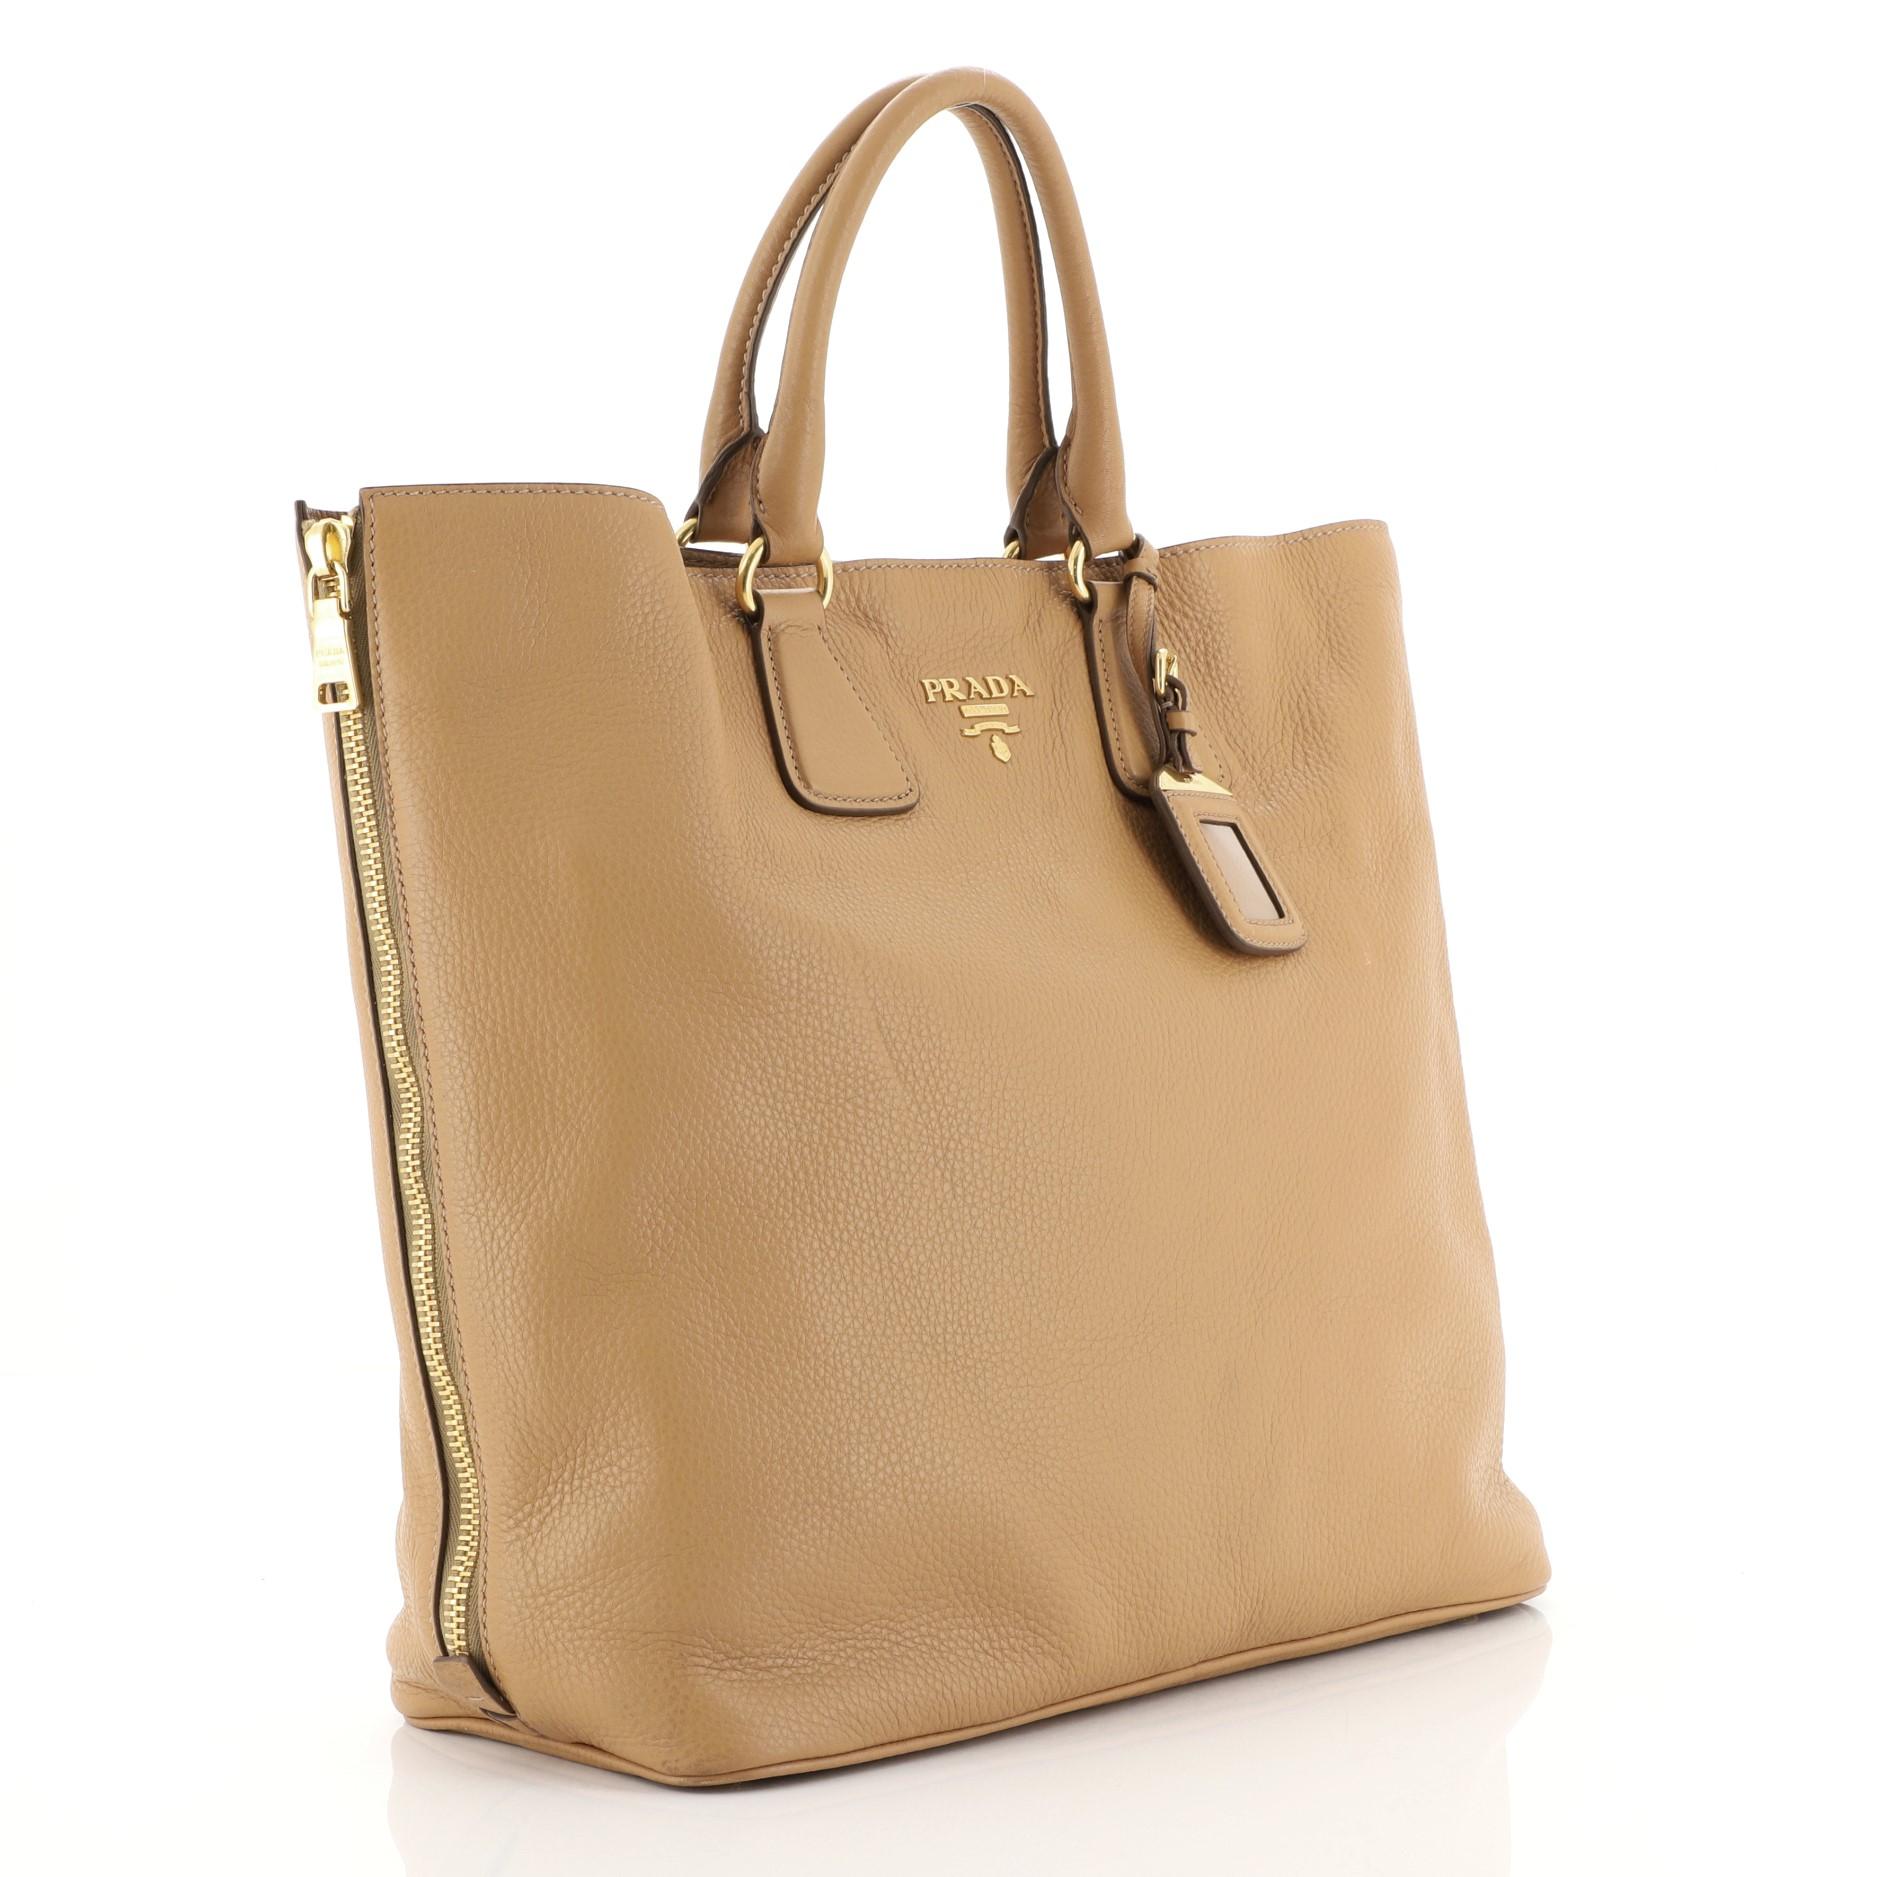 This Prada Side Zip Convertible Shopper Tote Vitello Daino Large, crafted from brown vitello daino leather, features dual rolled handles, raised Prada logo at its center, and gold-tone hardware. Its snap closure opens to a brown fabric interior with